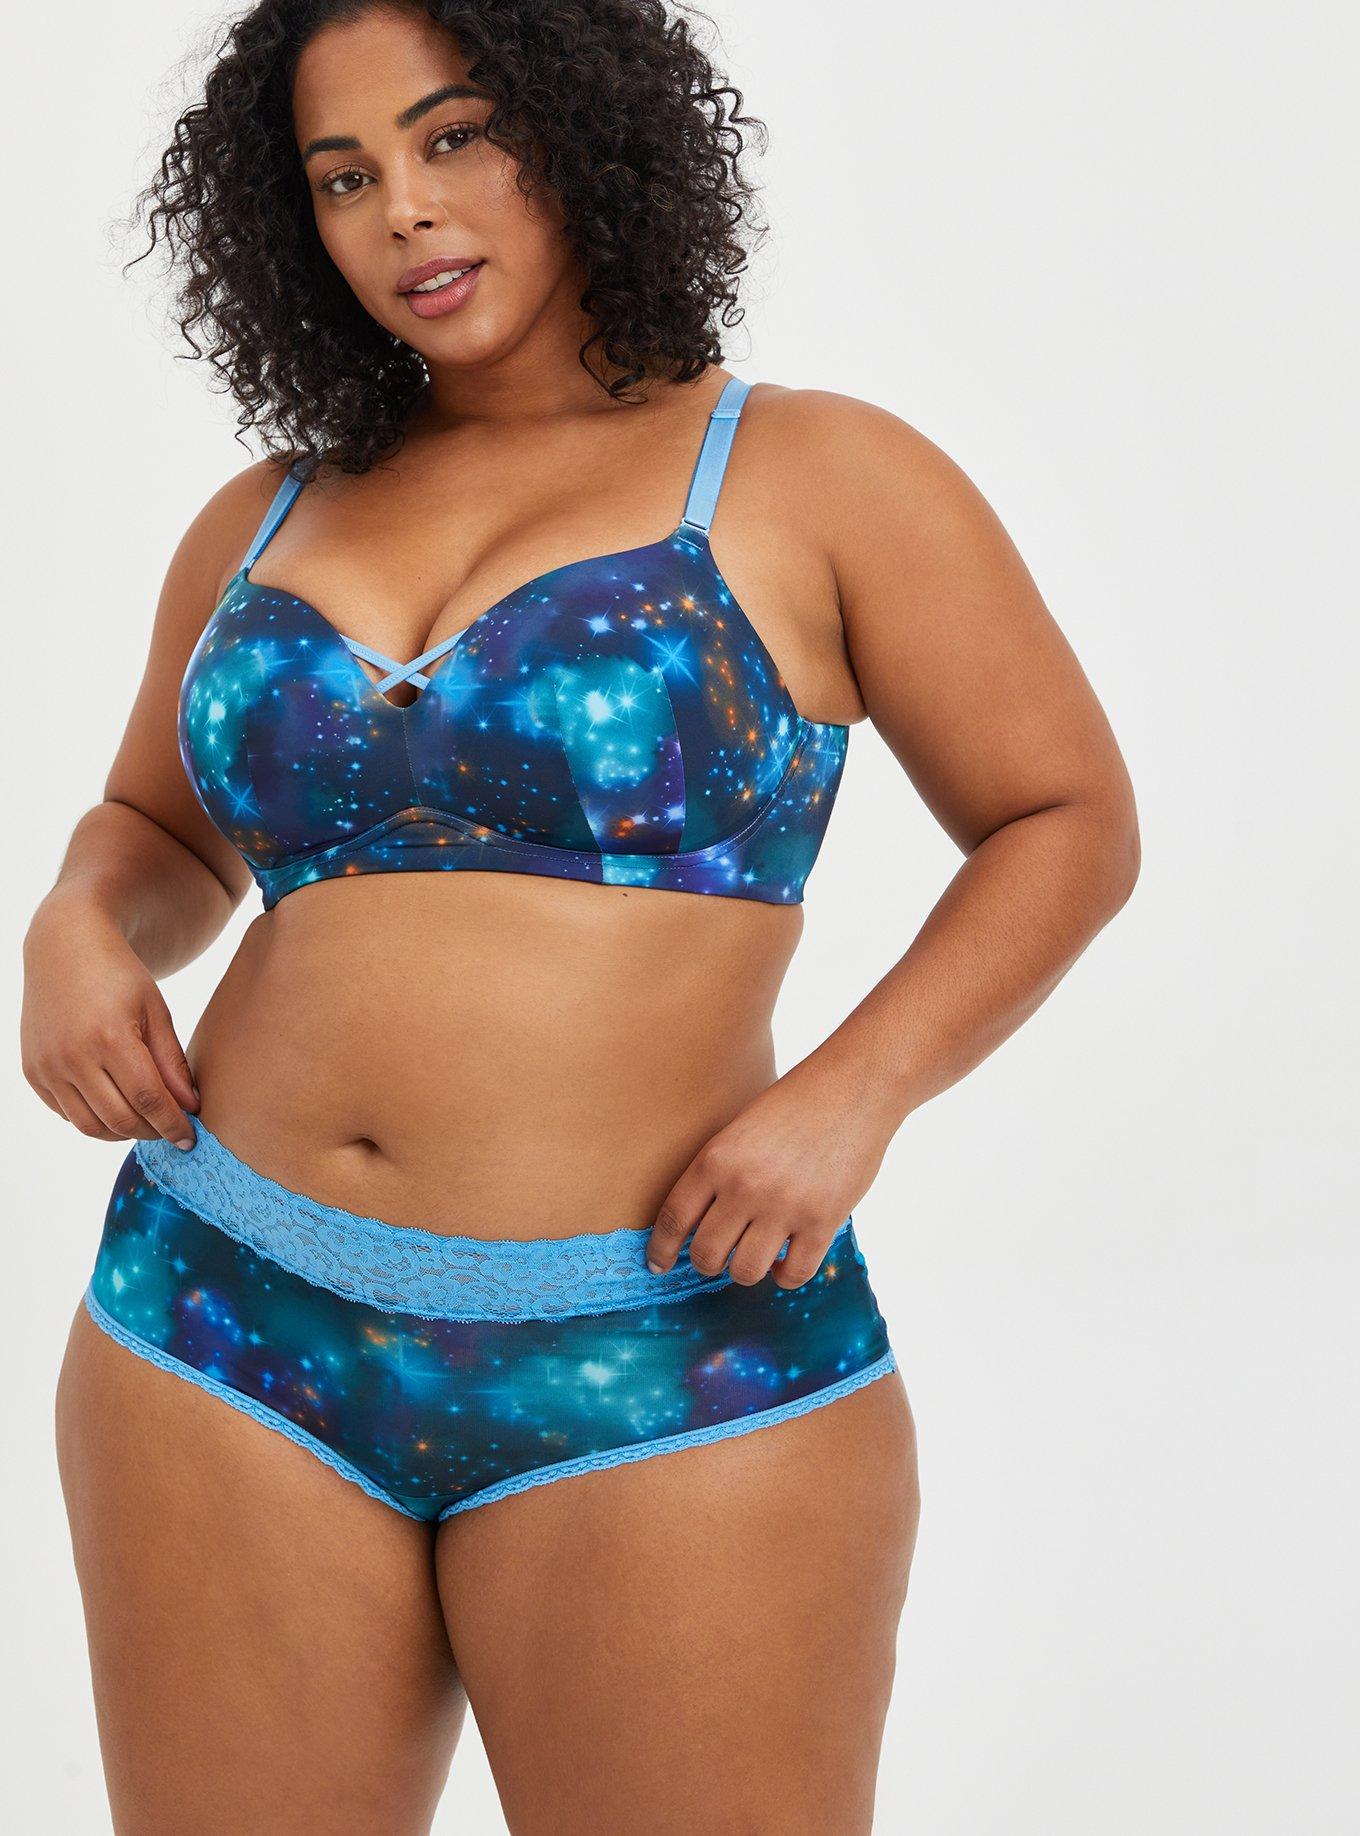 Torrid - Warwick Mall - Introducing our NEW Sexy Full Coverage Bra!